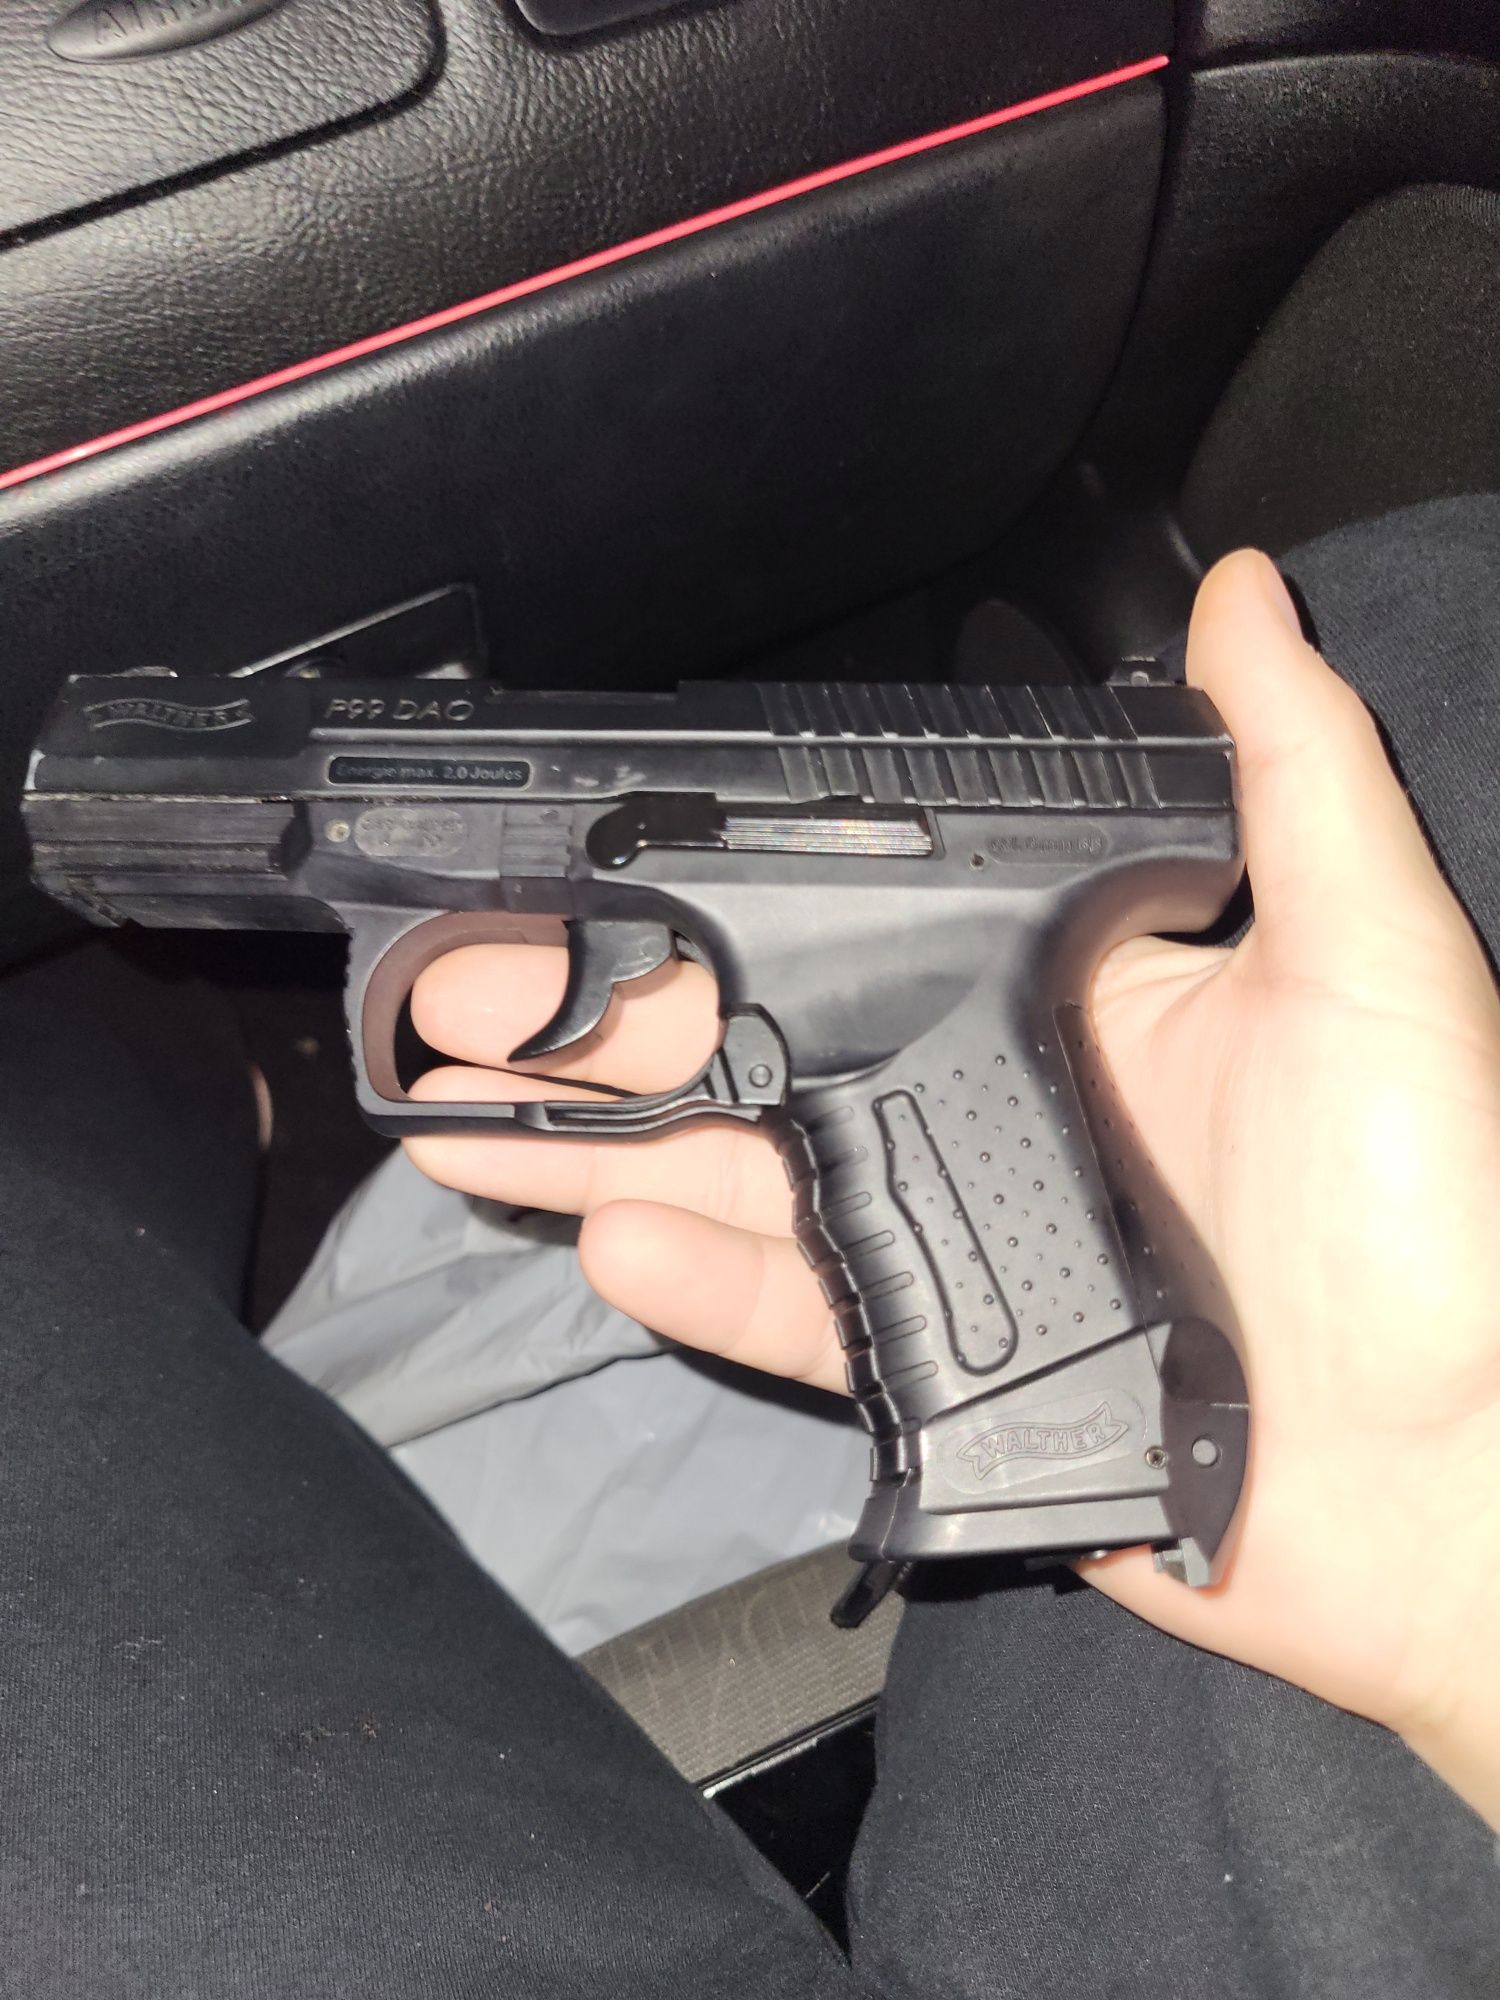 Airsoft co2 Walther